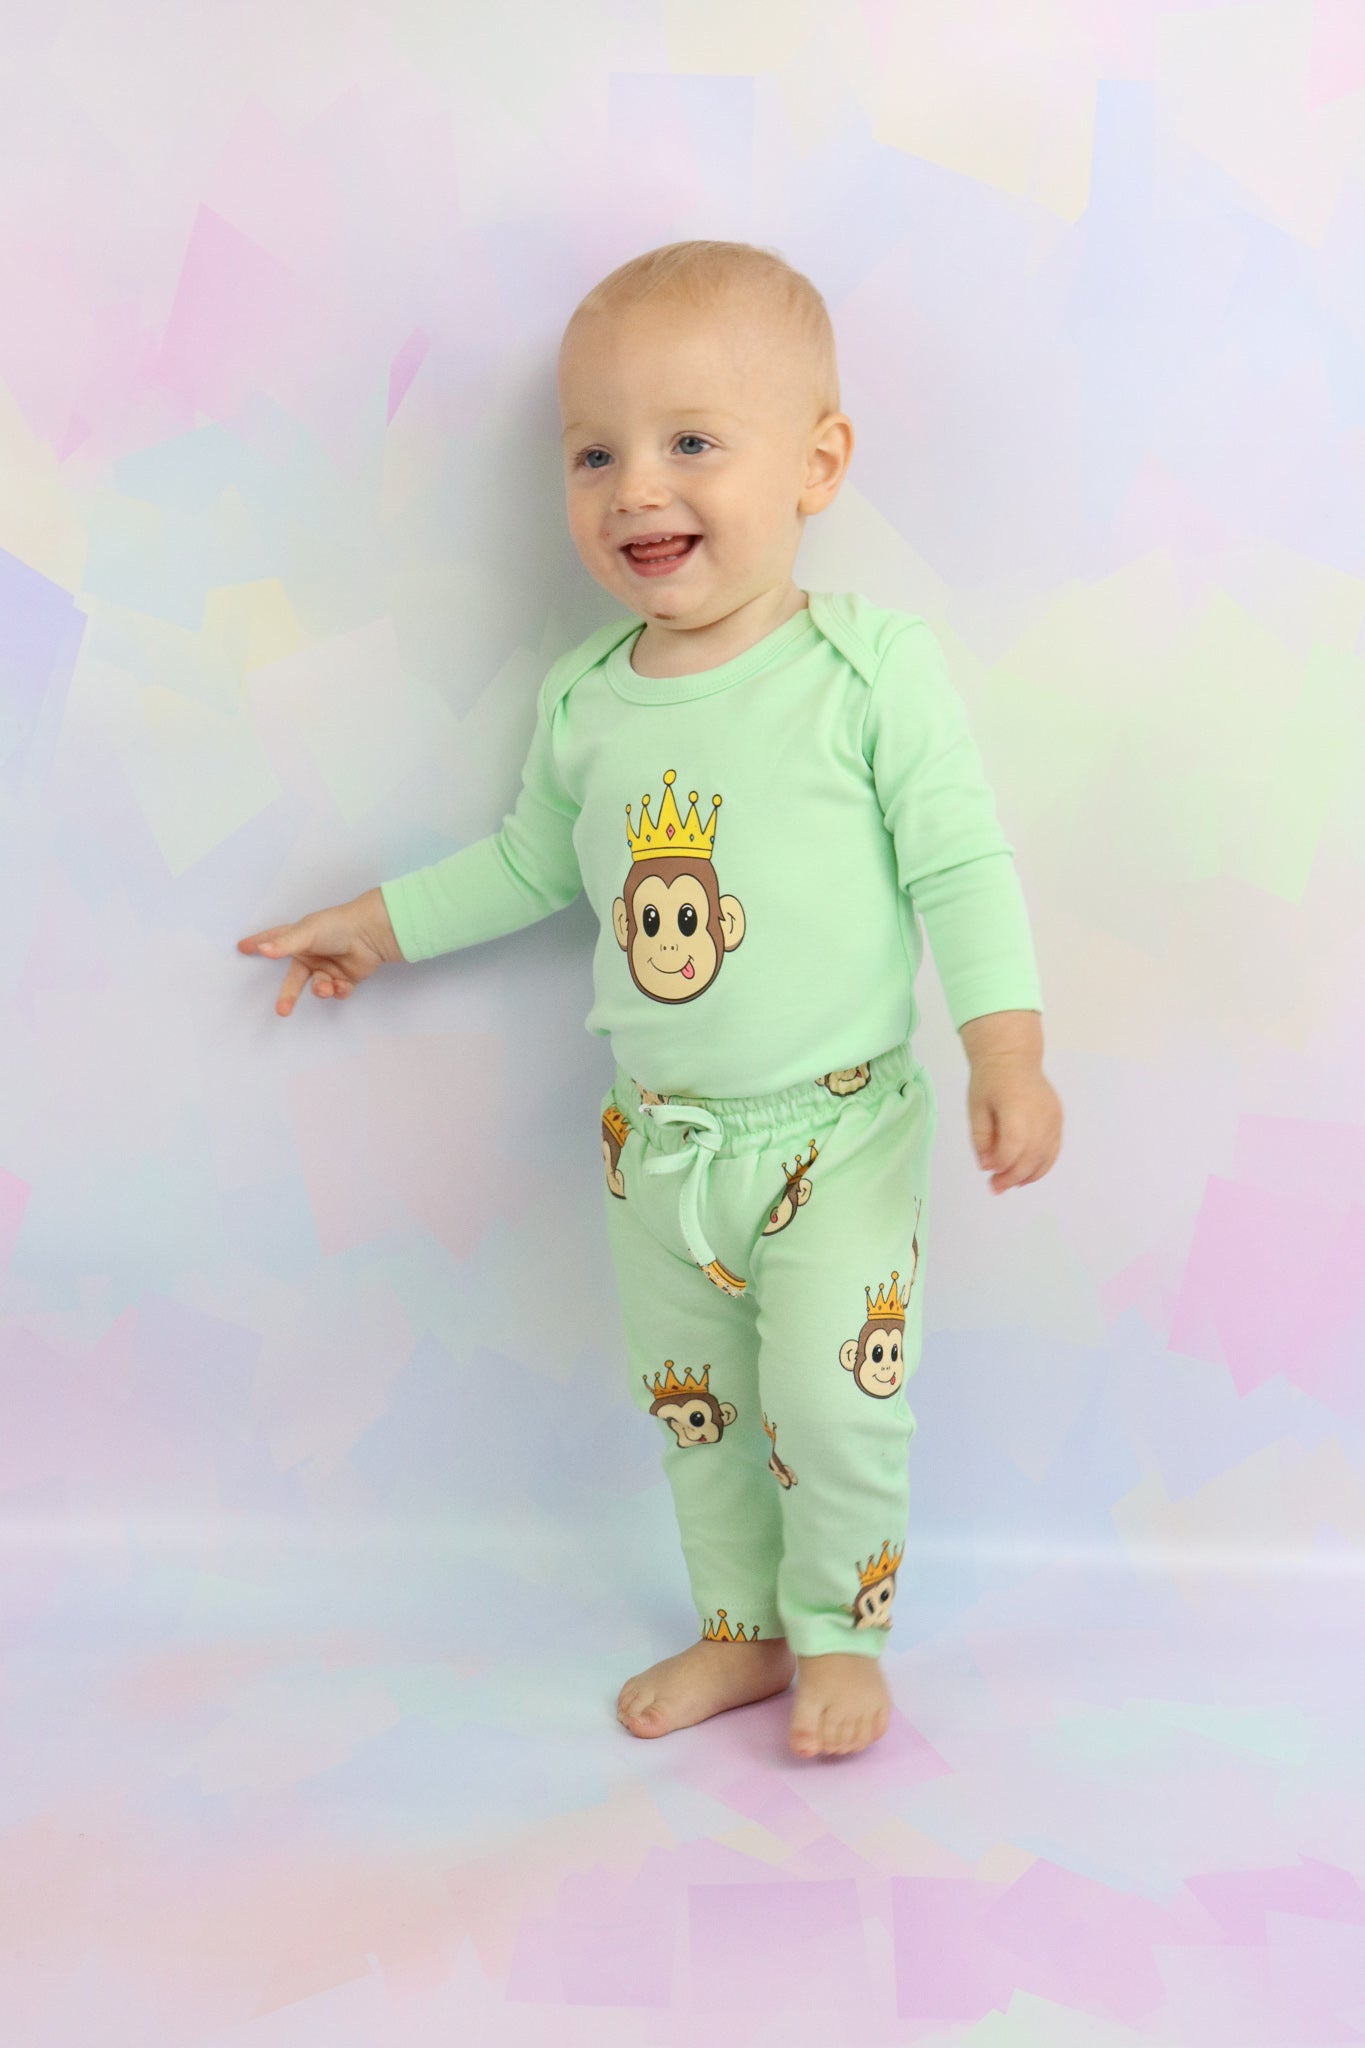 toddler boy standing up and smiling, wearing a pastel green long sleeve romper with a cute monkey design on it. Also wearing pastel green pants with the cute monkey design printed all over